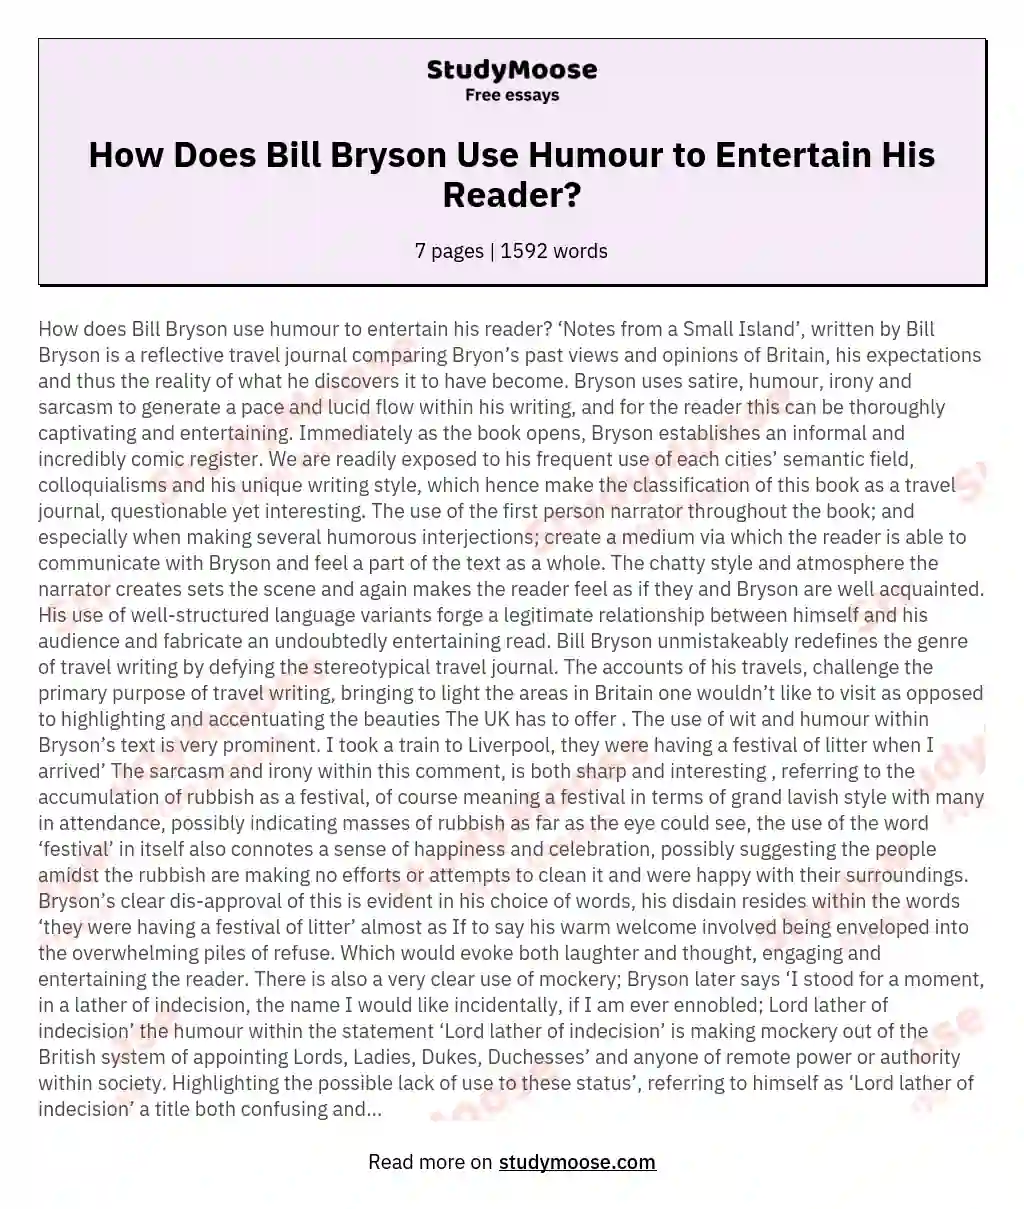 How Does Bill Bryson Use Humour to Entertain His Reader?